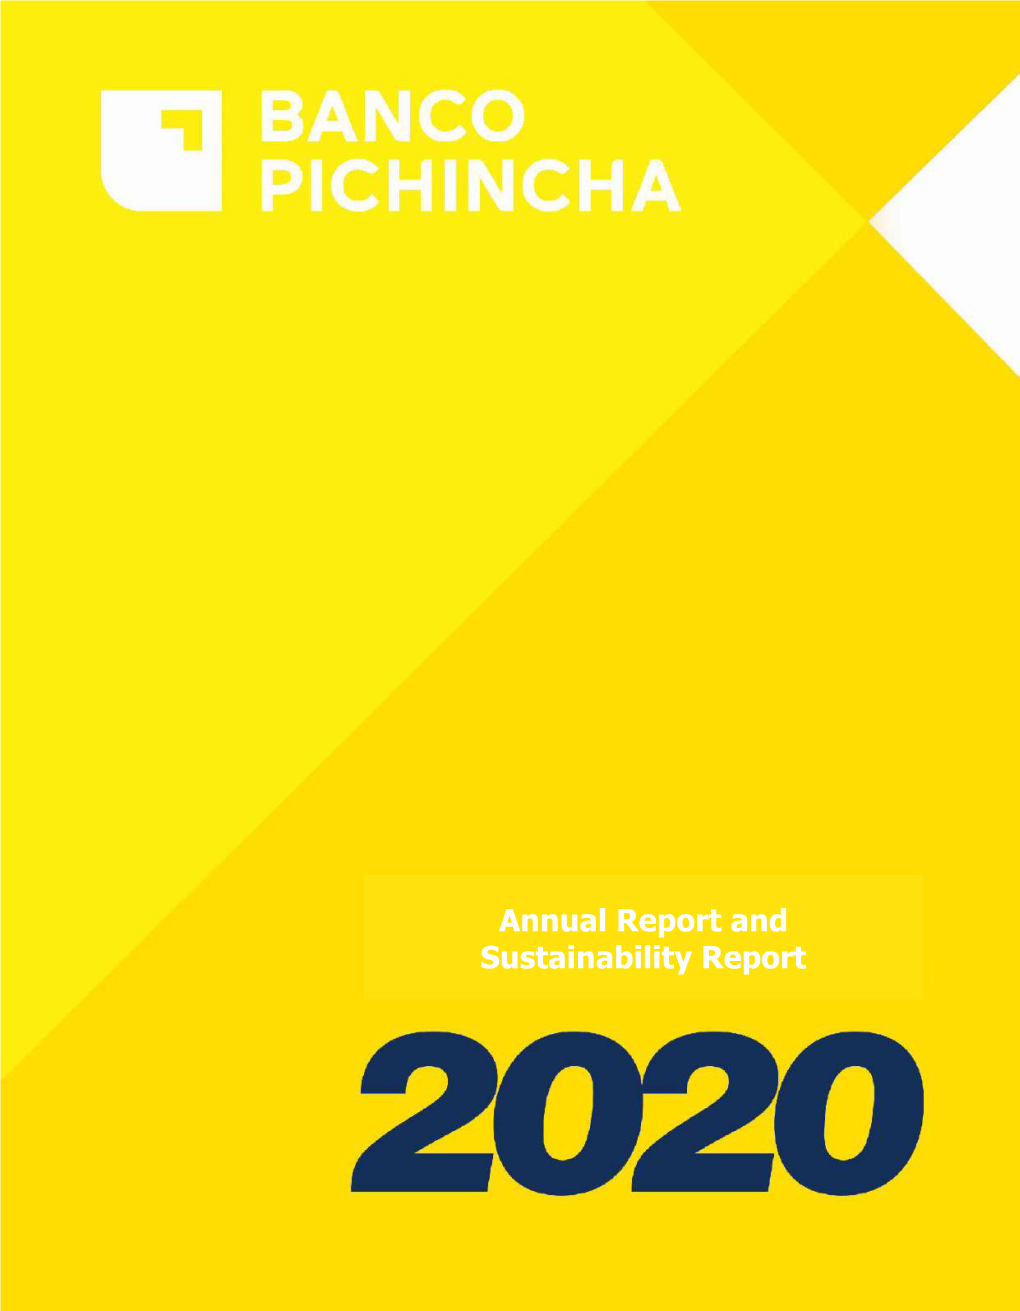 Annual Report and Sustainability Report